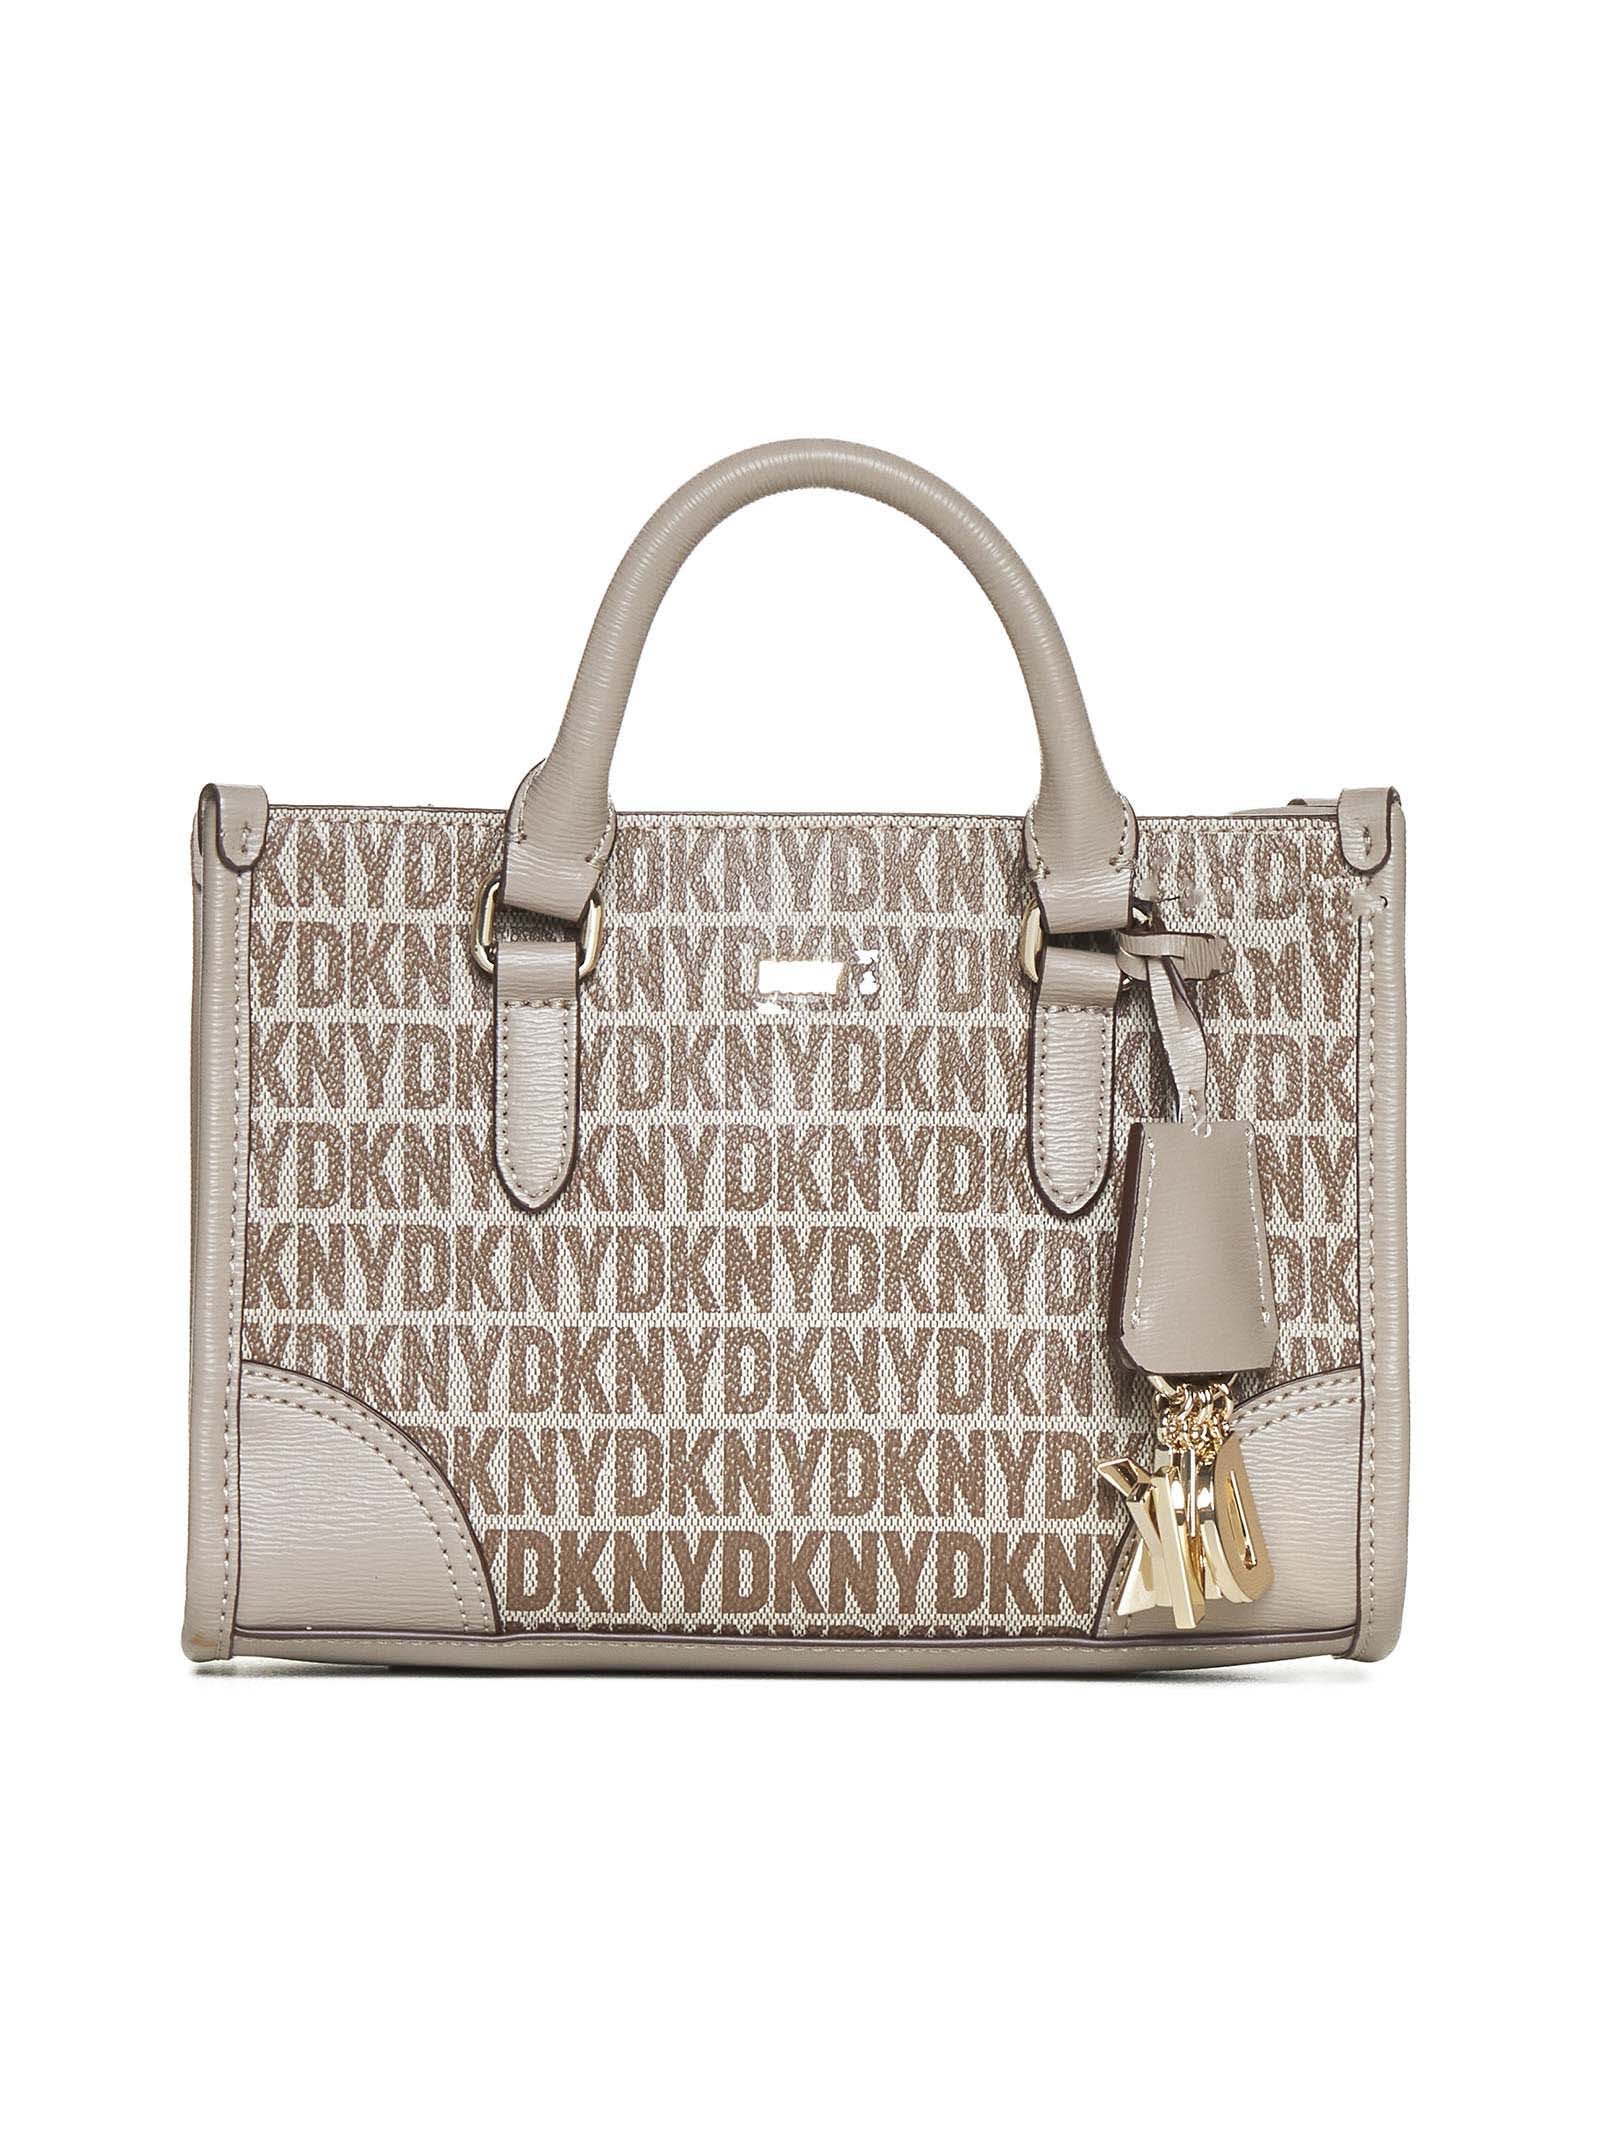 Dkny Bags In Chino/toffee